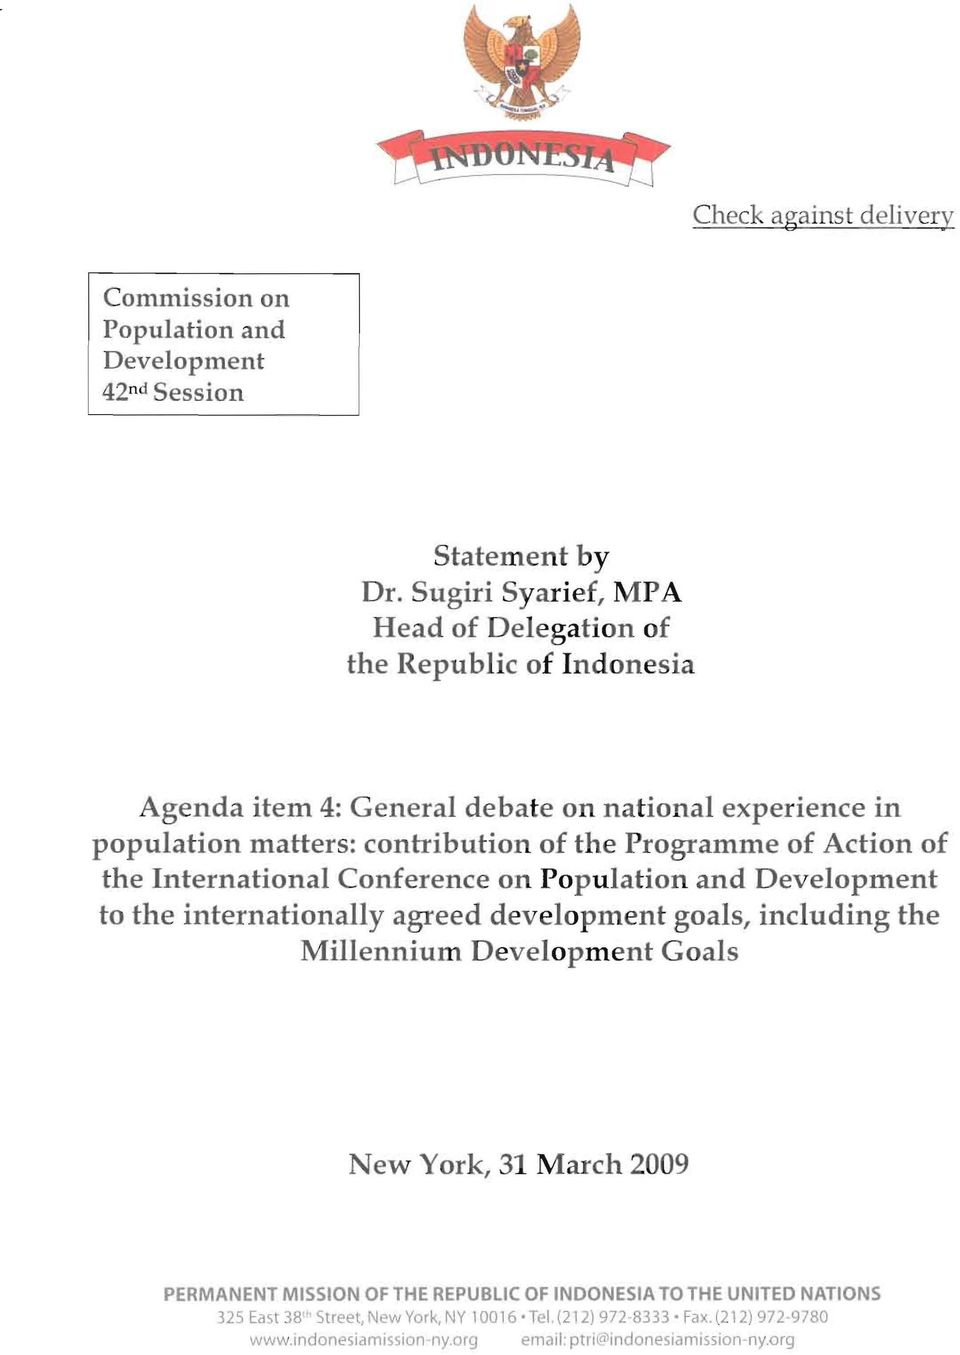 Programme of Action of the International Conference on Population and Development to the internationally agreed development goals, including the Millennium Development